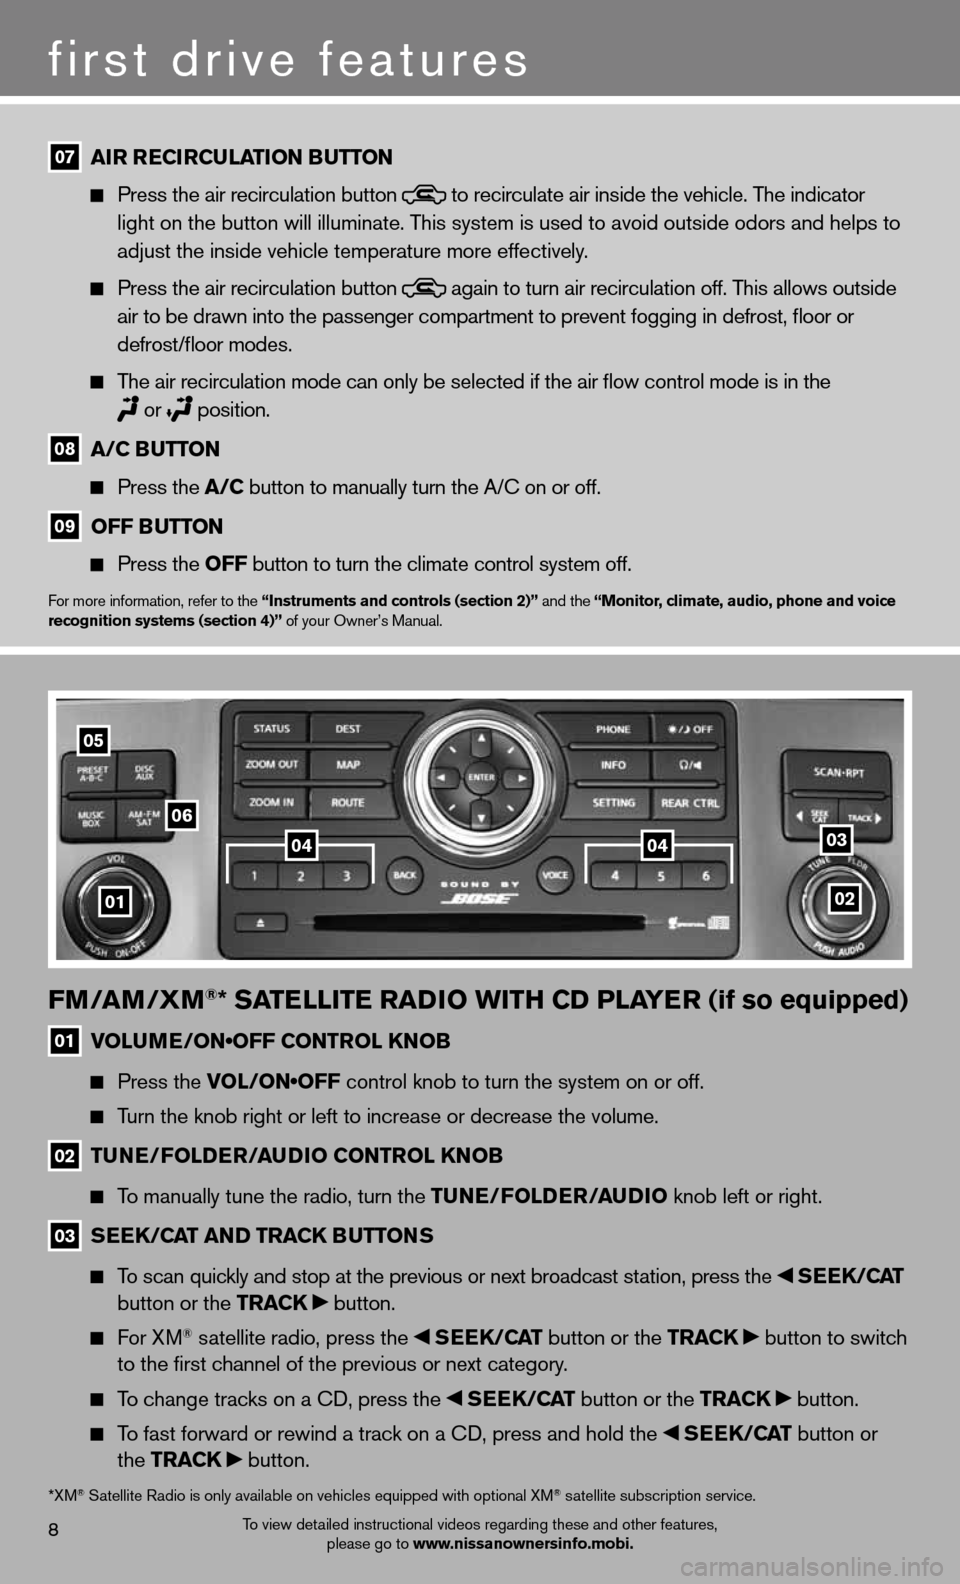 NISSAN ARMADA 2012 1.G Quick Reference Guide fm/am /Xm®* satE llitE raD io With CD PlayE r (if so equipped)
01 VOLUME/ON•OFF CONTROL KNOB
  
  Press the VOL/ON•OFF control knob to turn the system on or off.   
  
  Turn the knob right or le